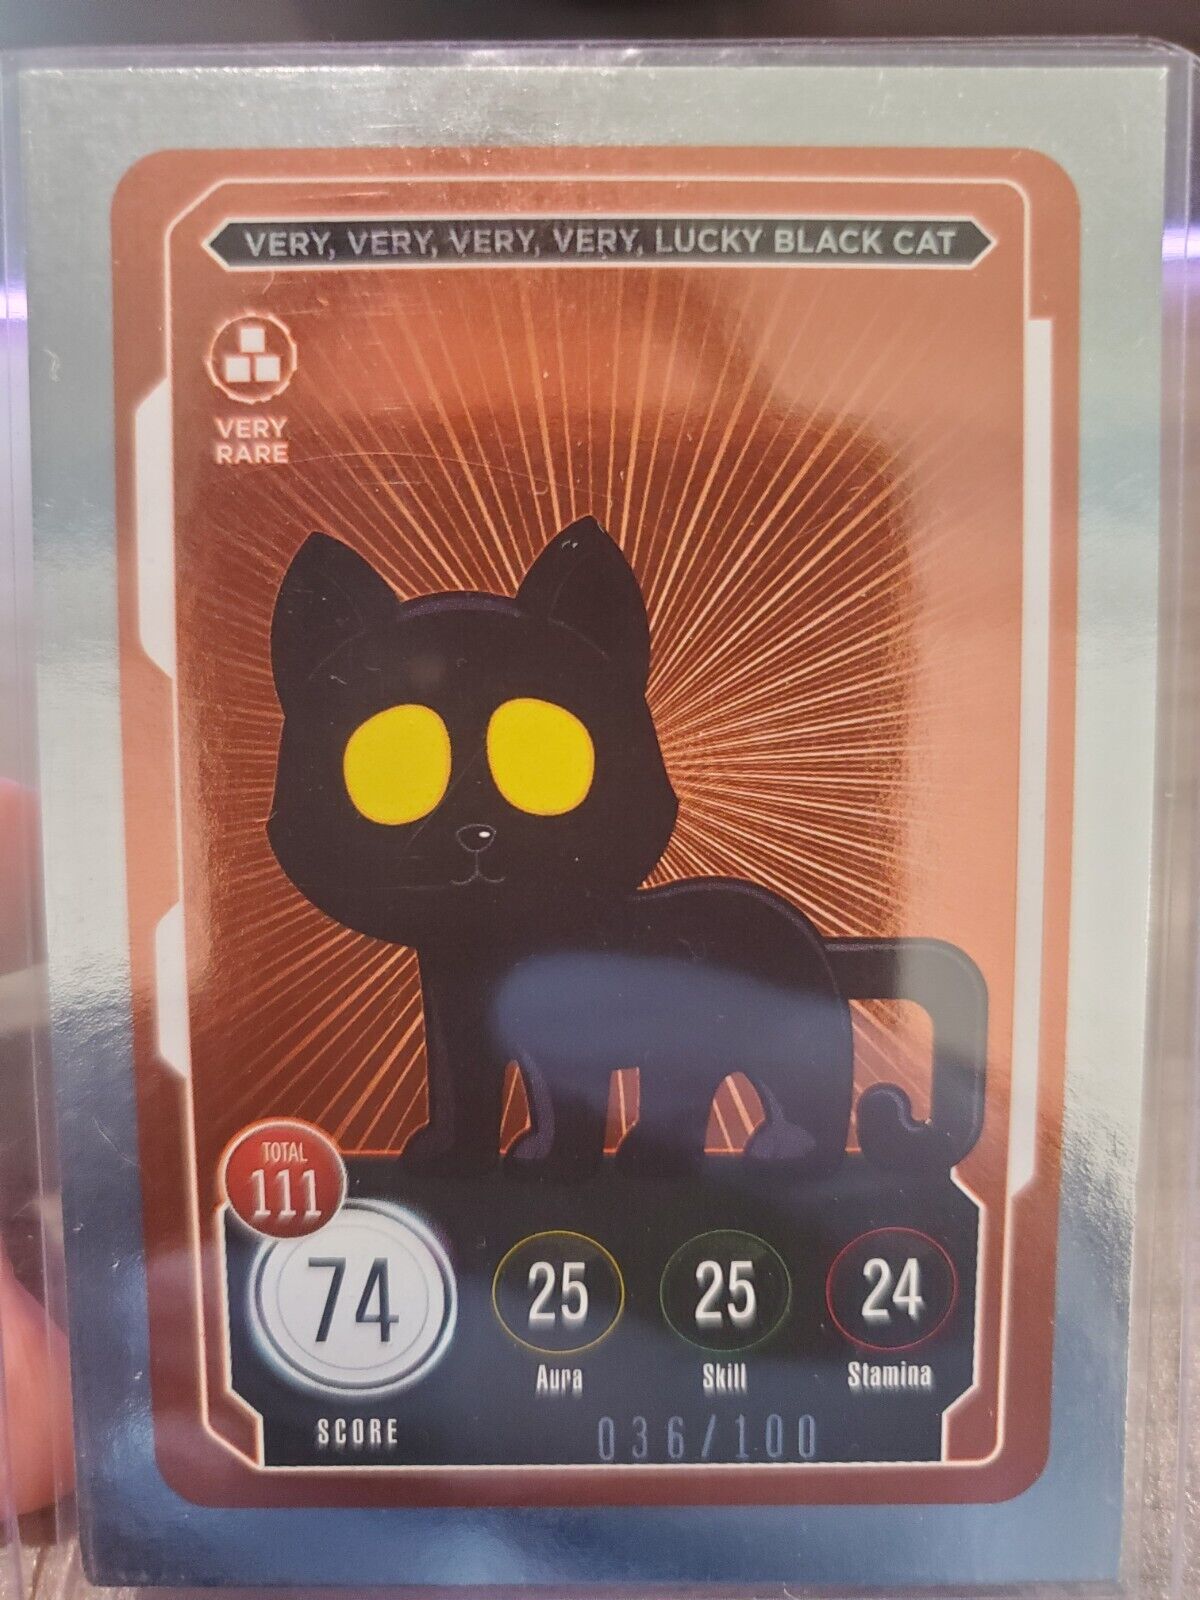 Very Lucky Black Cat VERY RARE 36/100 Veefriends “Compete and Collect” Zerocool